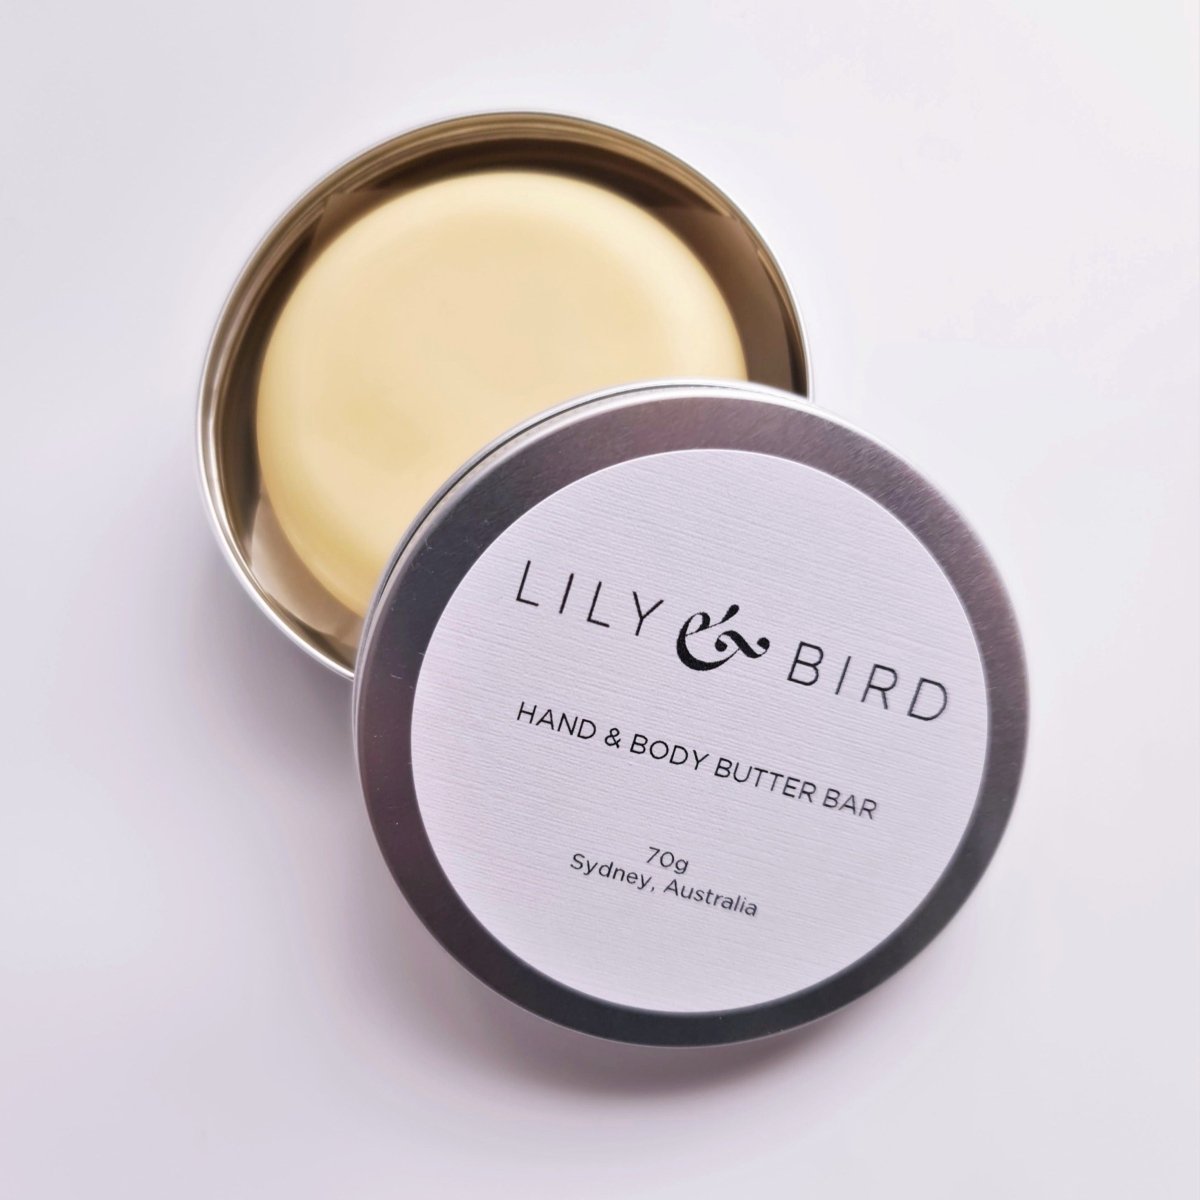 Hand & Body Butter Bar - Lily and Bird